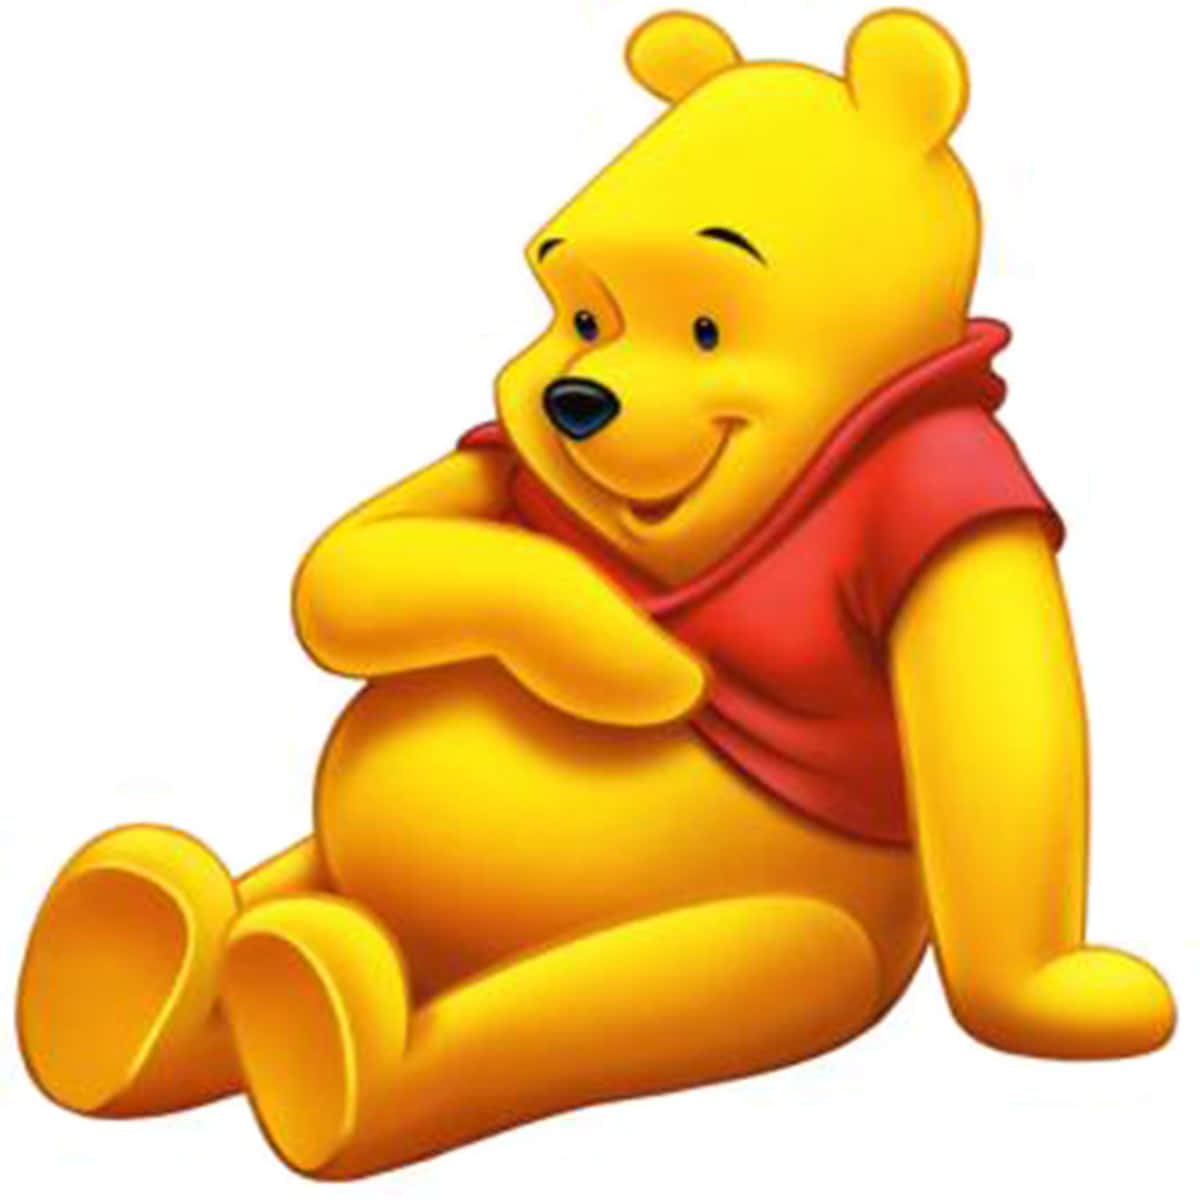 The classic book character, Winnie The Pooh, comes to life.